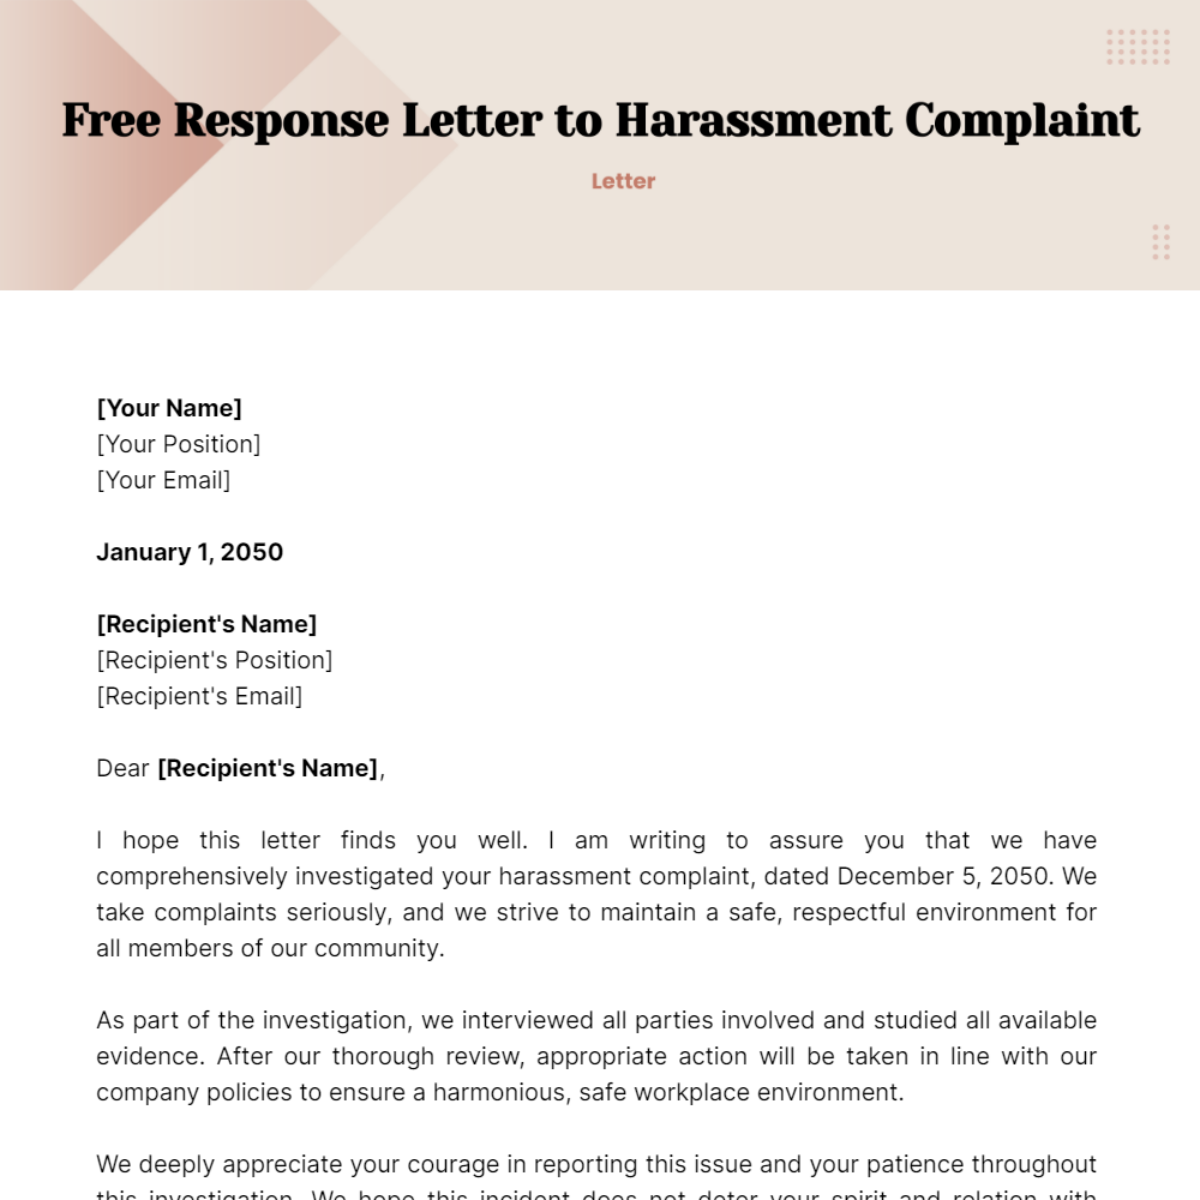 Free Response Letter to Harassment Complaint